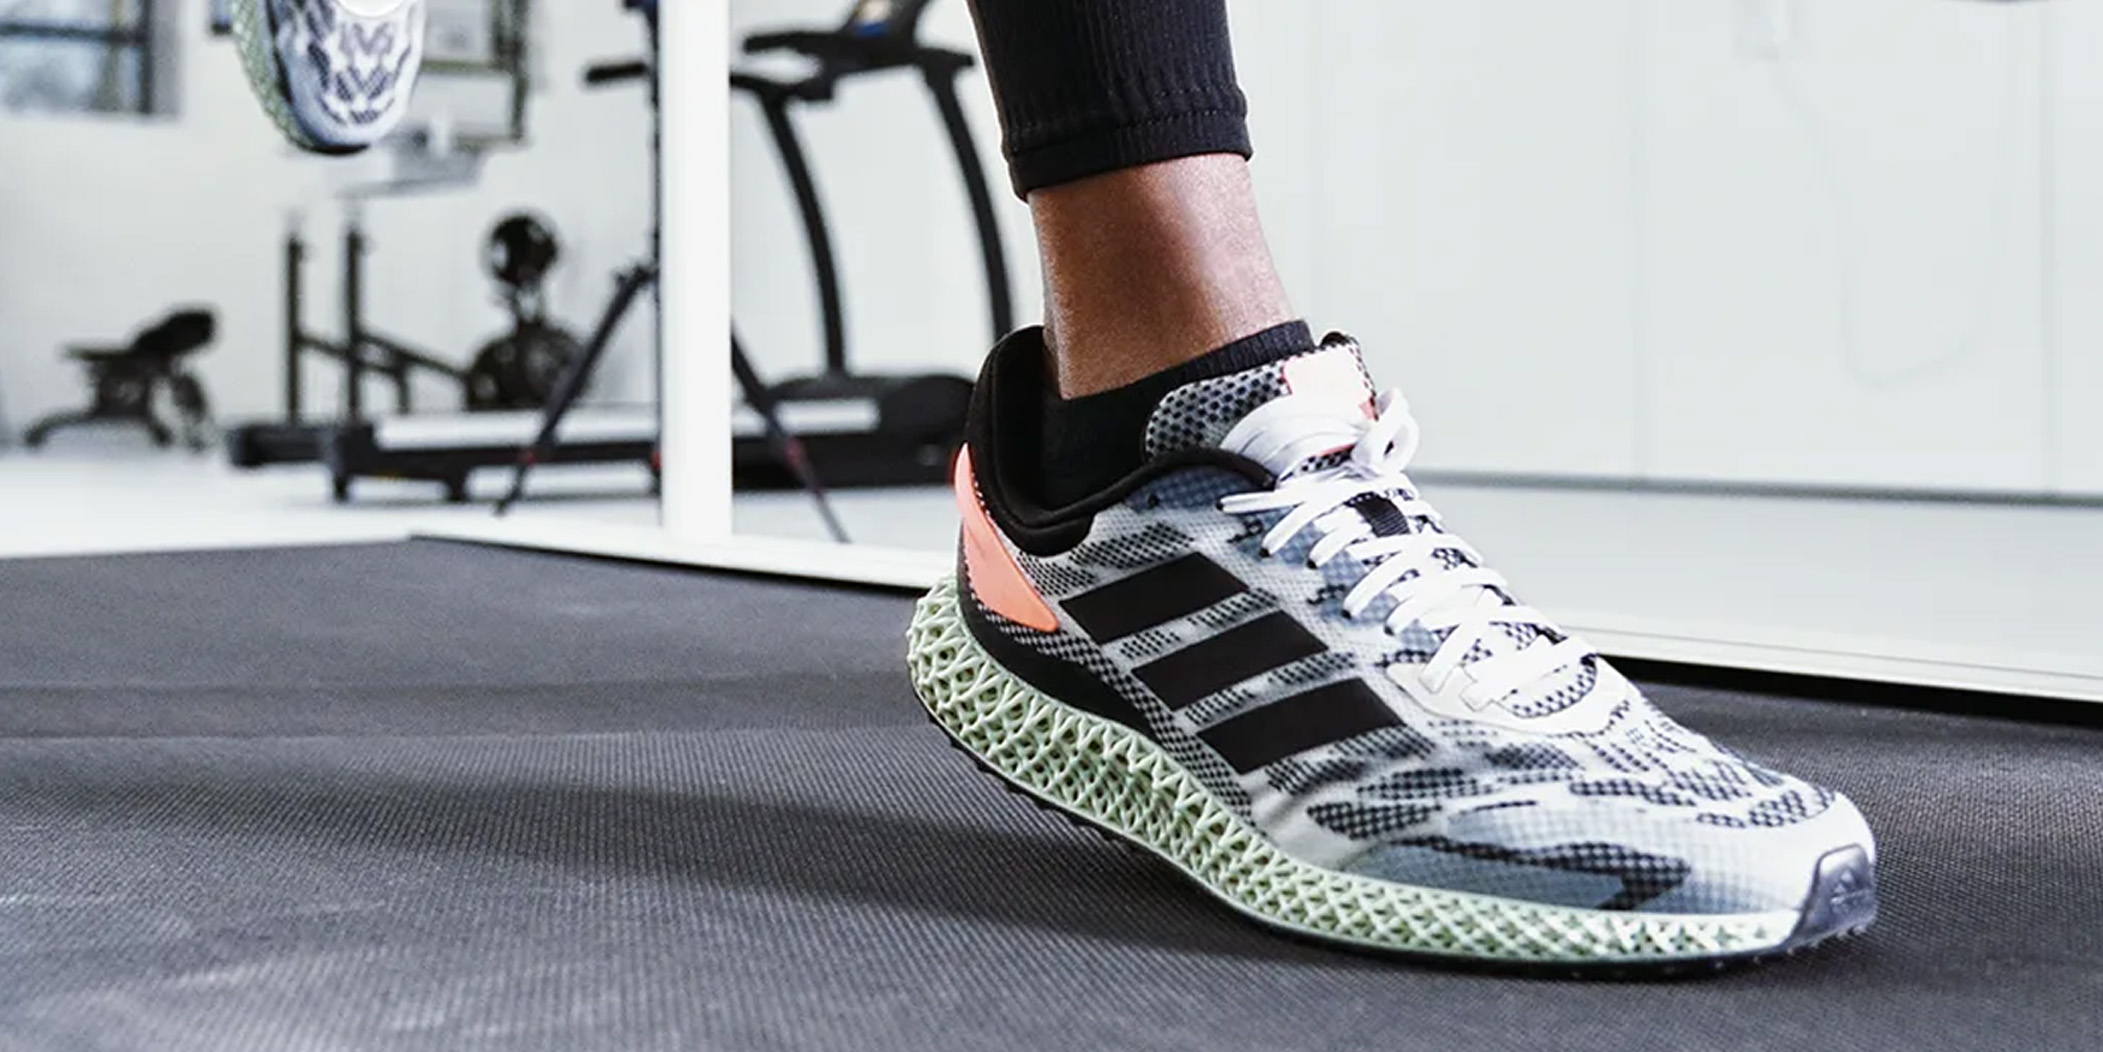 The adidas Holiday Gift Guide has ideas for every athlete - 9to5Toys